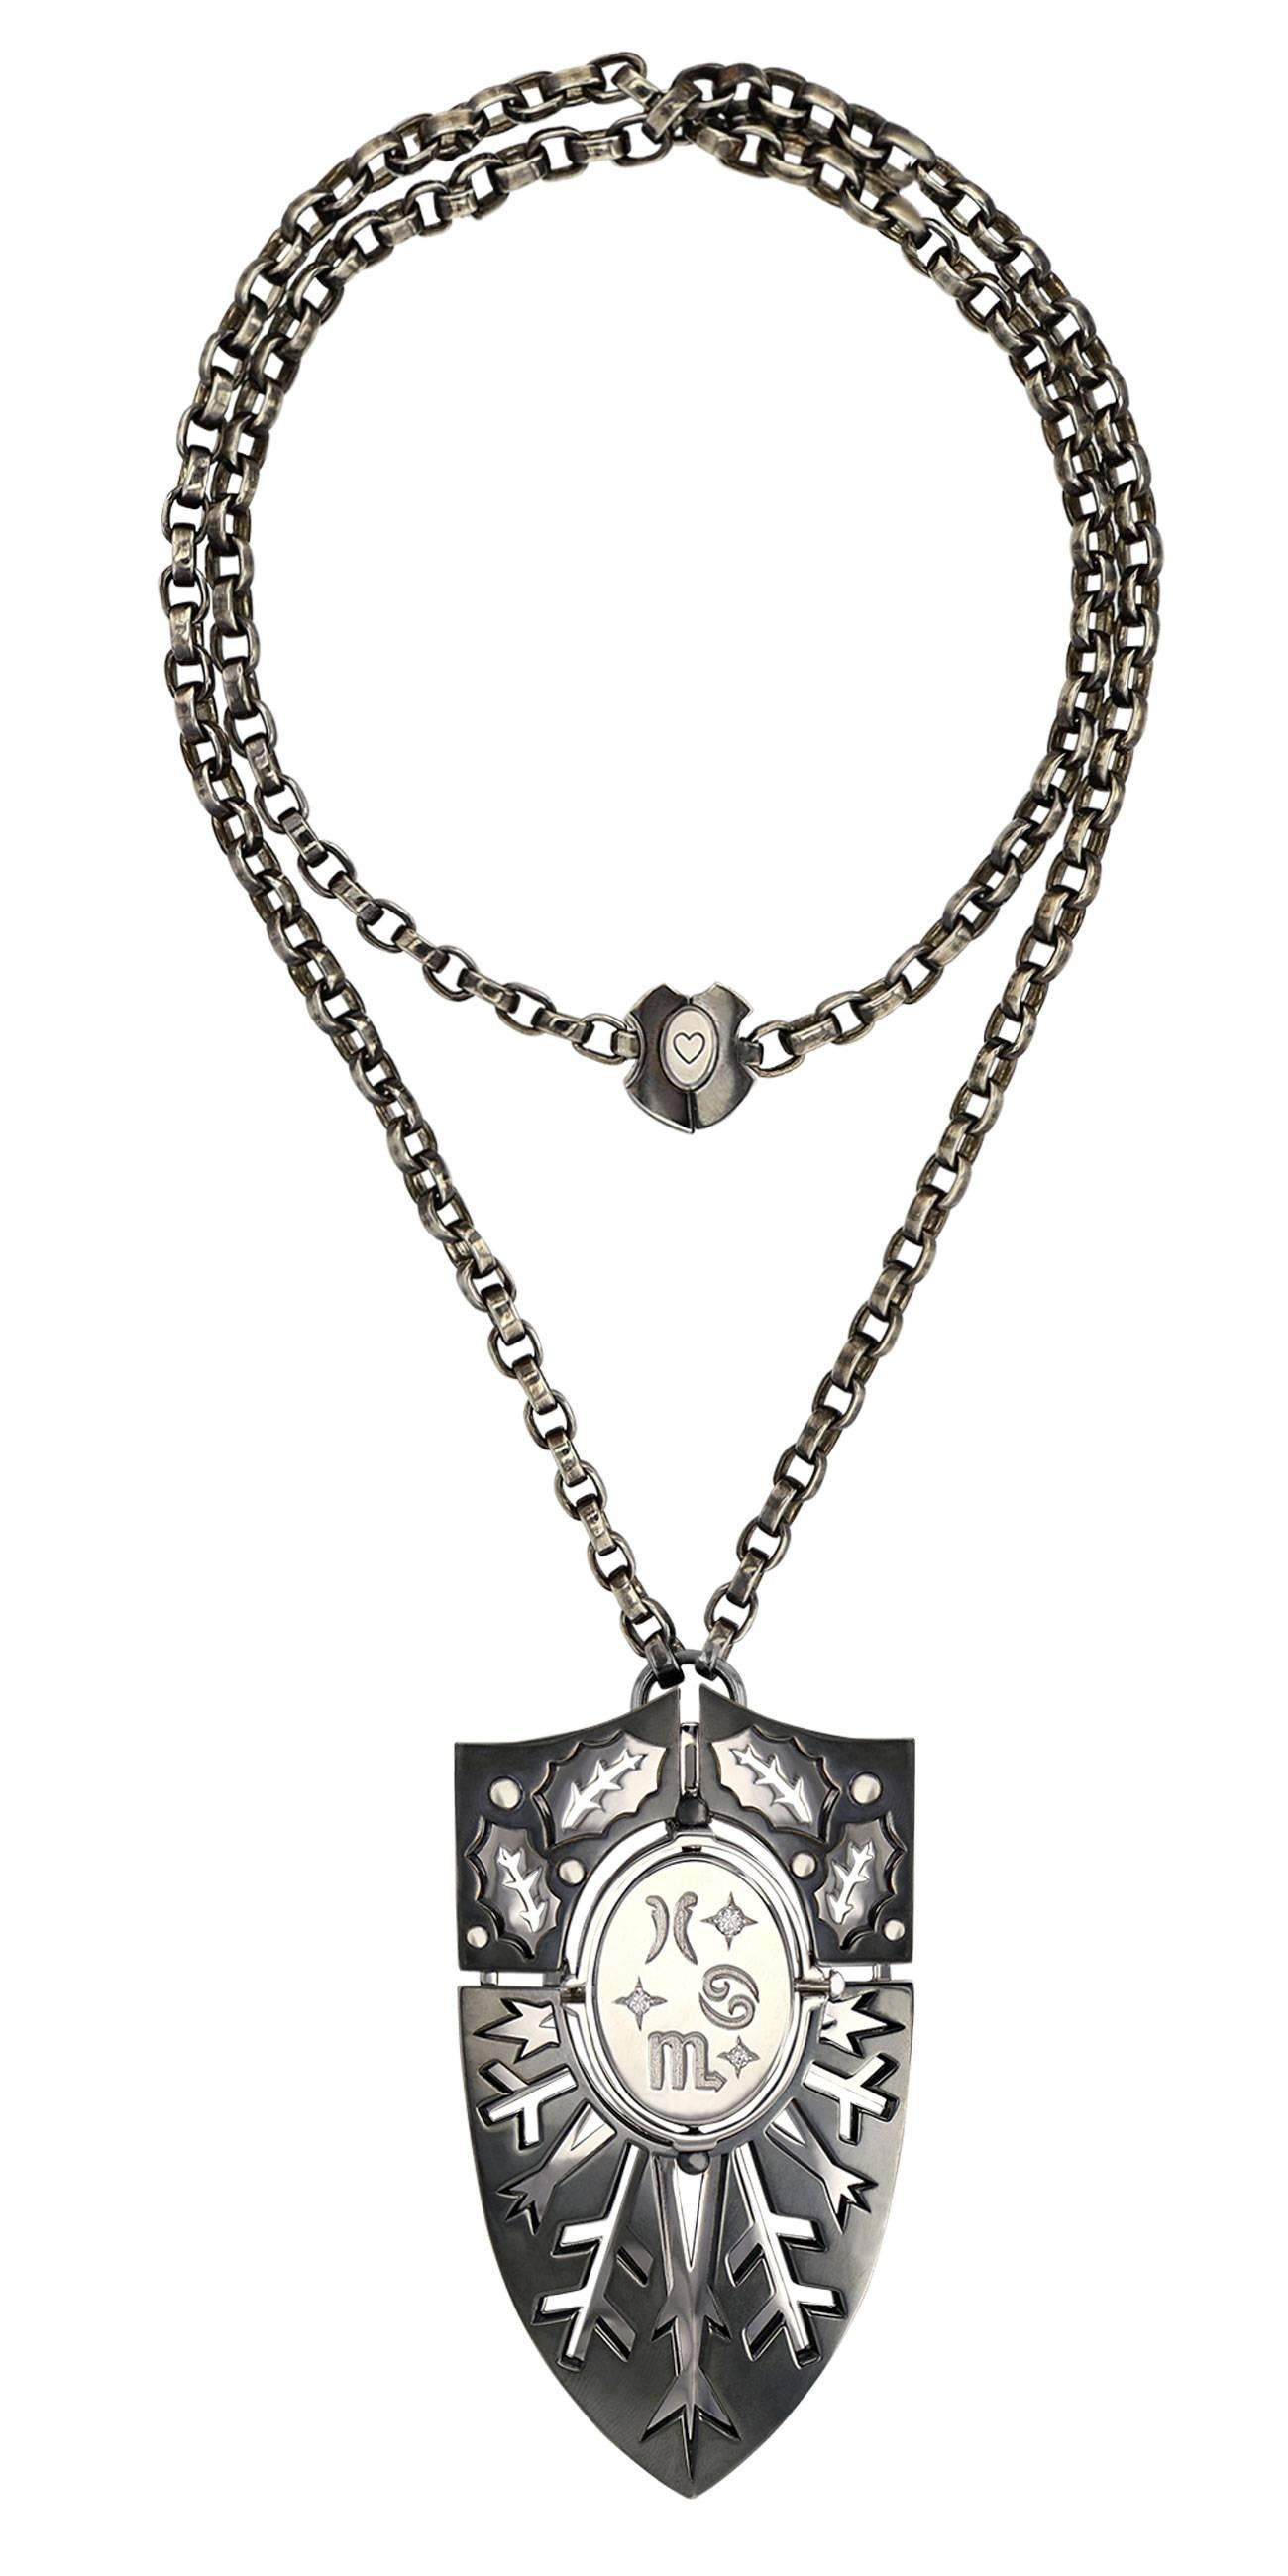 Shield Pendant EAU

Necklace of arms necklace mounted on a patinated silver chain, with a silver and yellow gold clasp engraved with tarot colors. The necklace is pierced, revealing plates with embossed motifs depicting the seasons. The pivoting